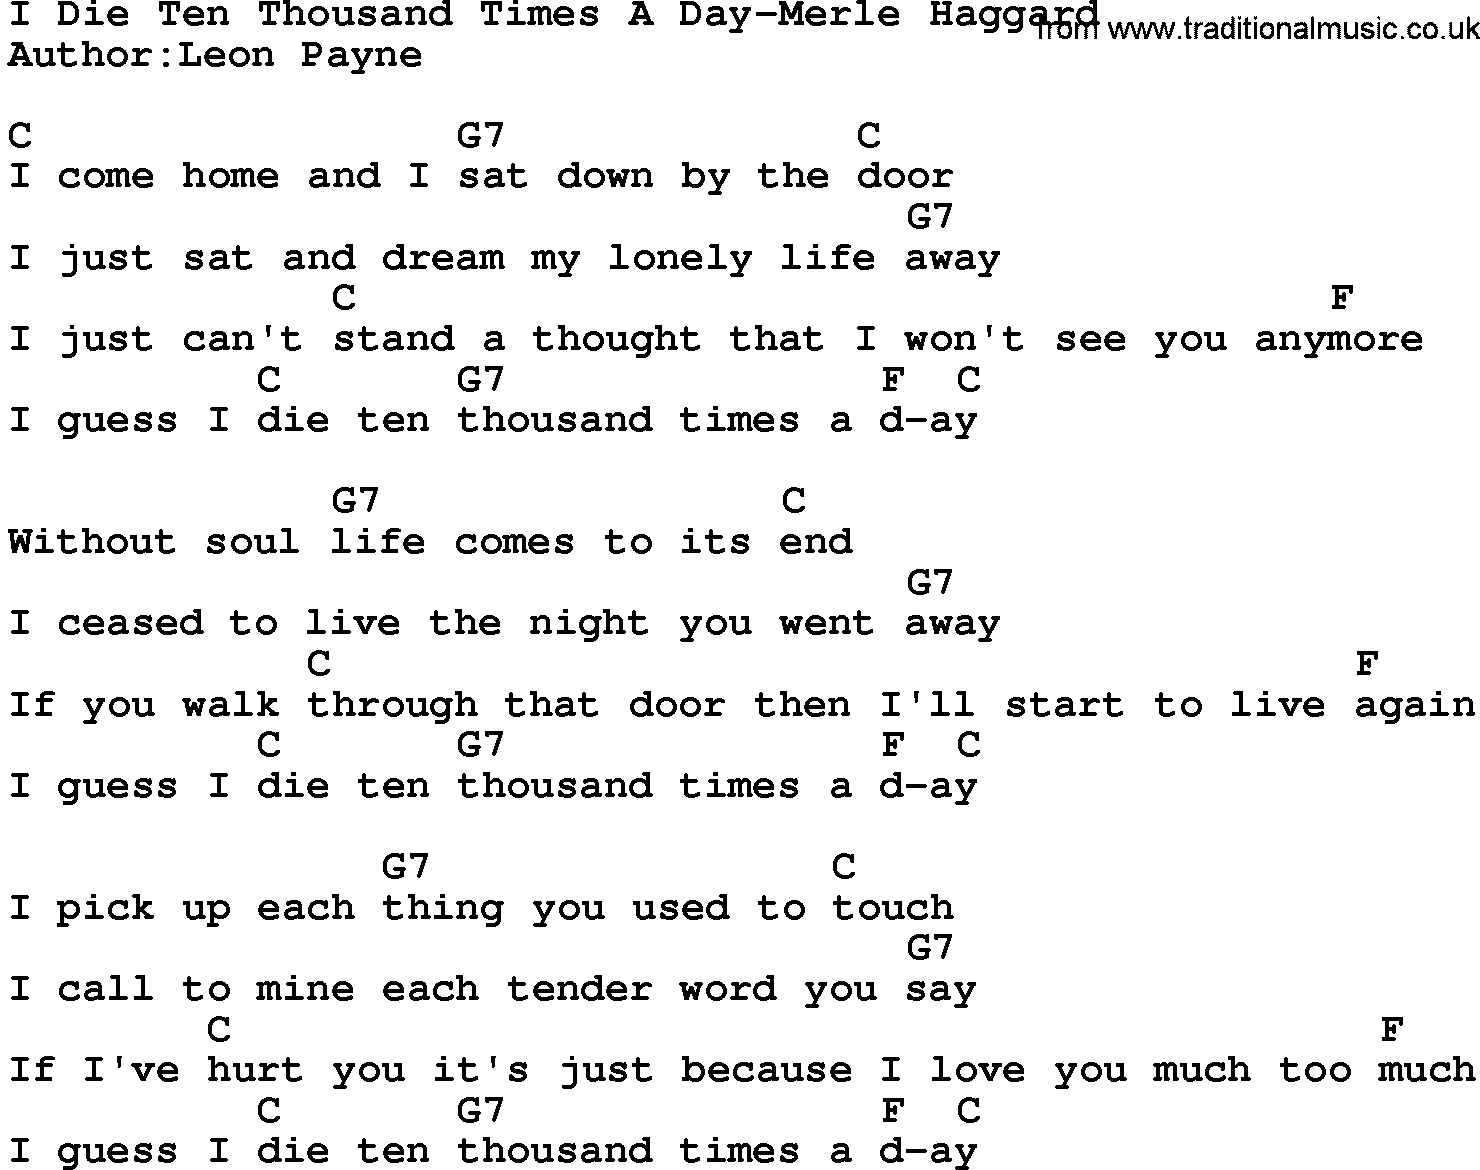 Country music song: I Die Ten Thousand Times A Day-Merle Haggard lyrics and chords